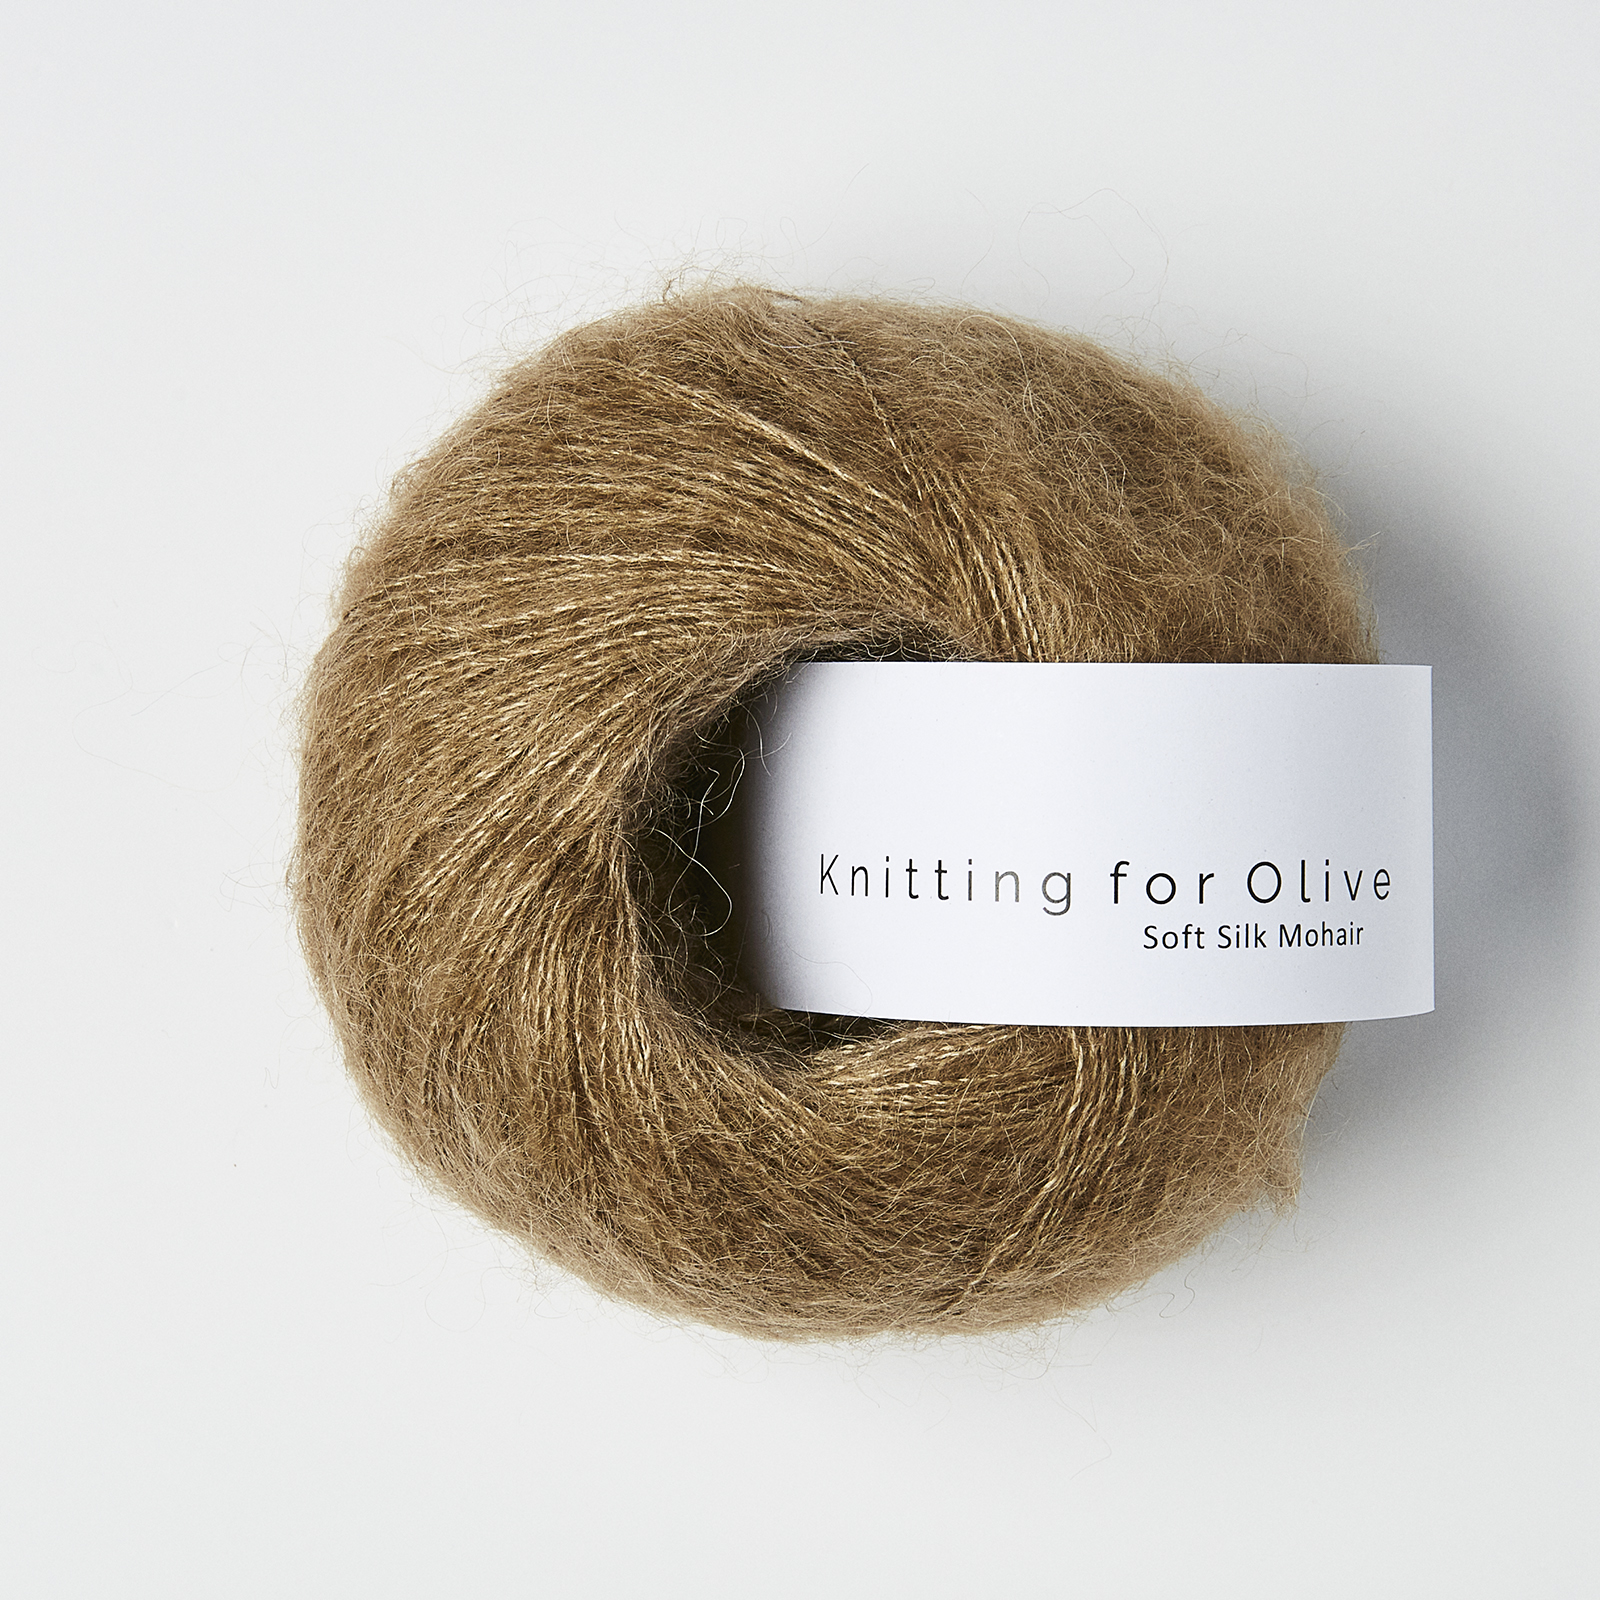 soft silk mohair knitting for olive | soft silk mohair: nut brown